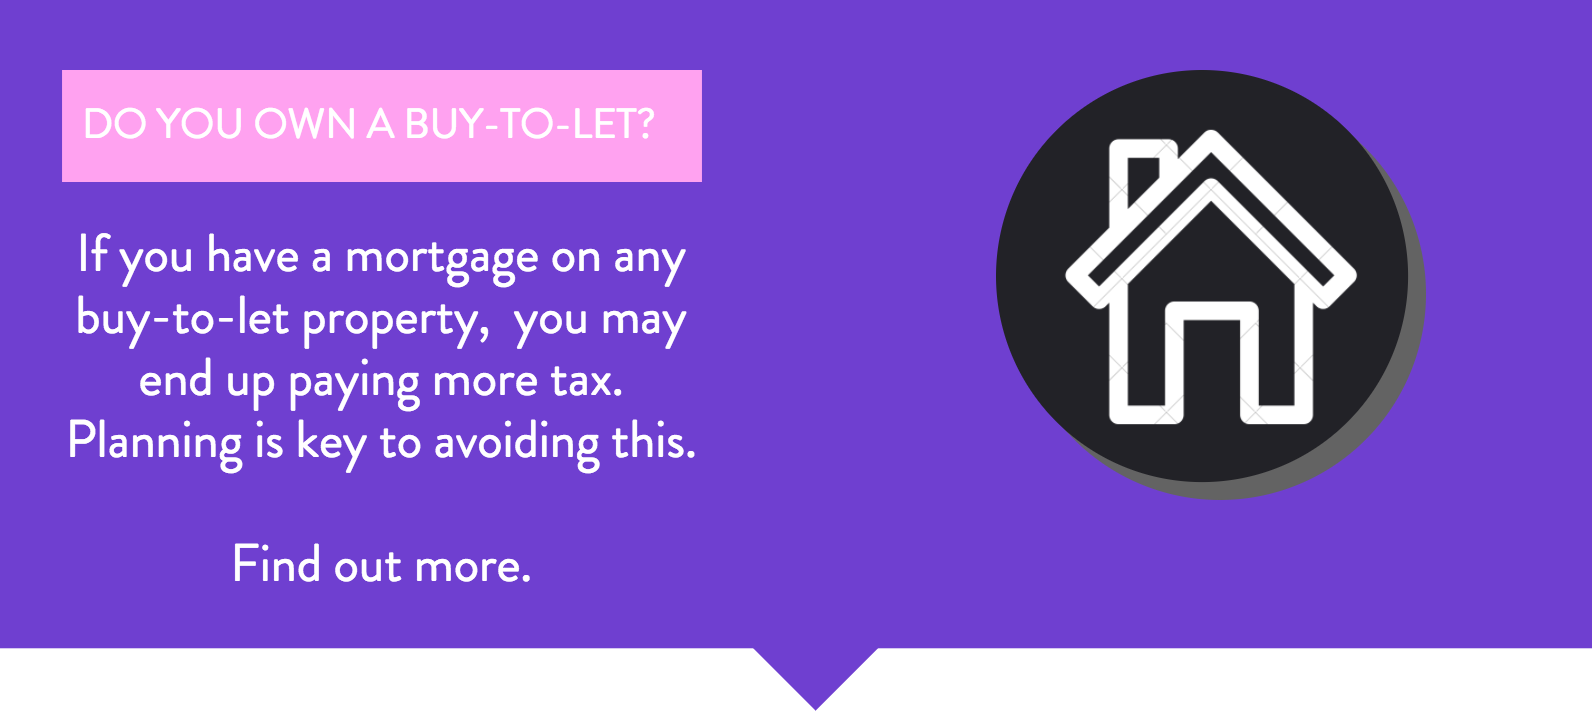 If you have a mortgage on a buy-to-let property you may end up paying more tax with changes in the new tax year